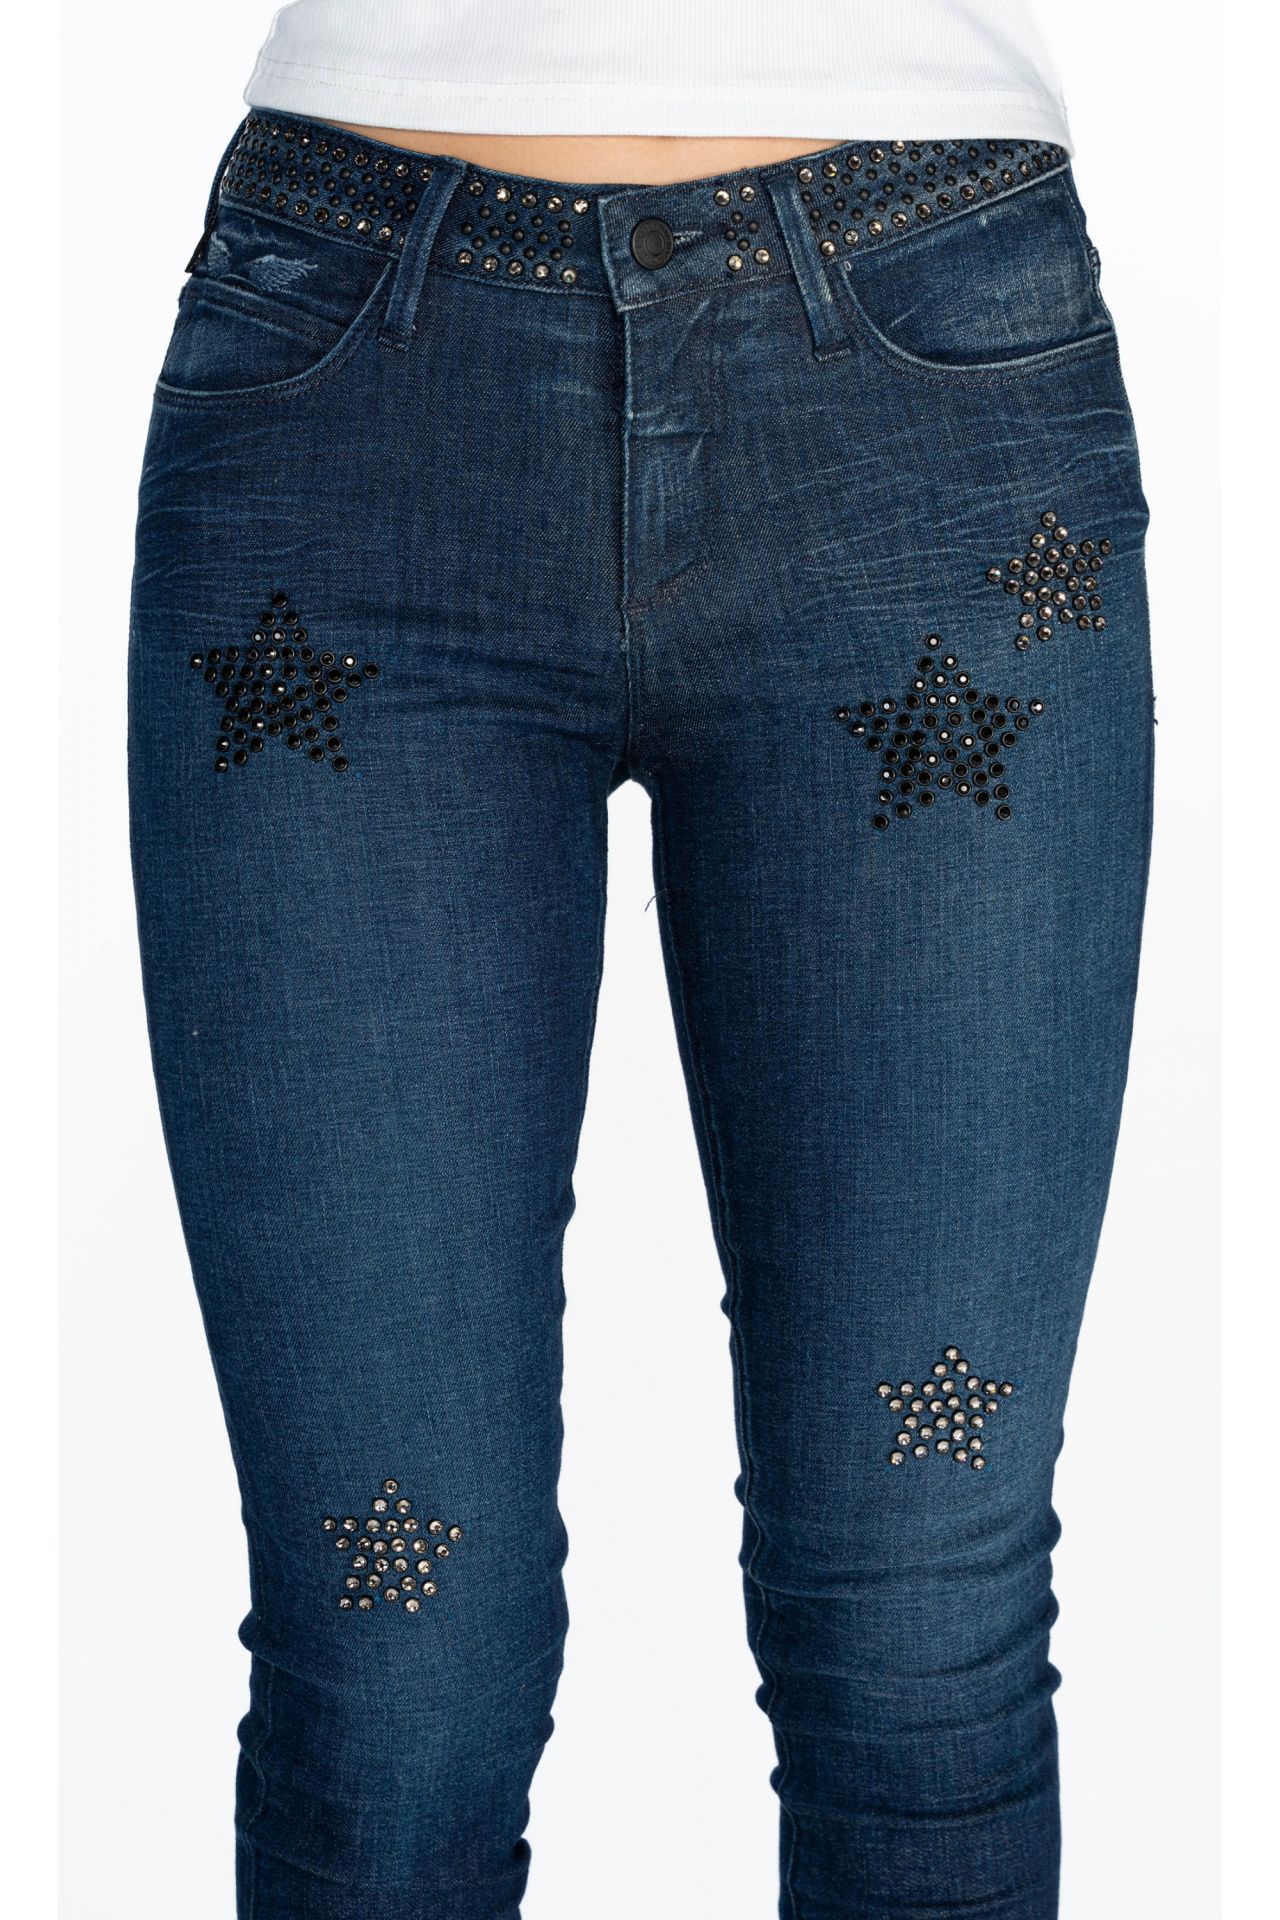 WOMENS MIDRISE SKINNY JEANS IN DARK BLUE WASH WITH CRYSTAL STARS